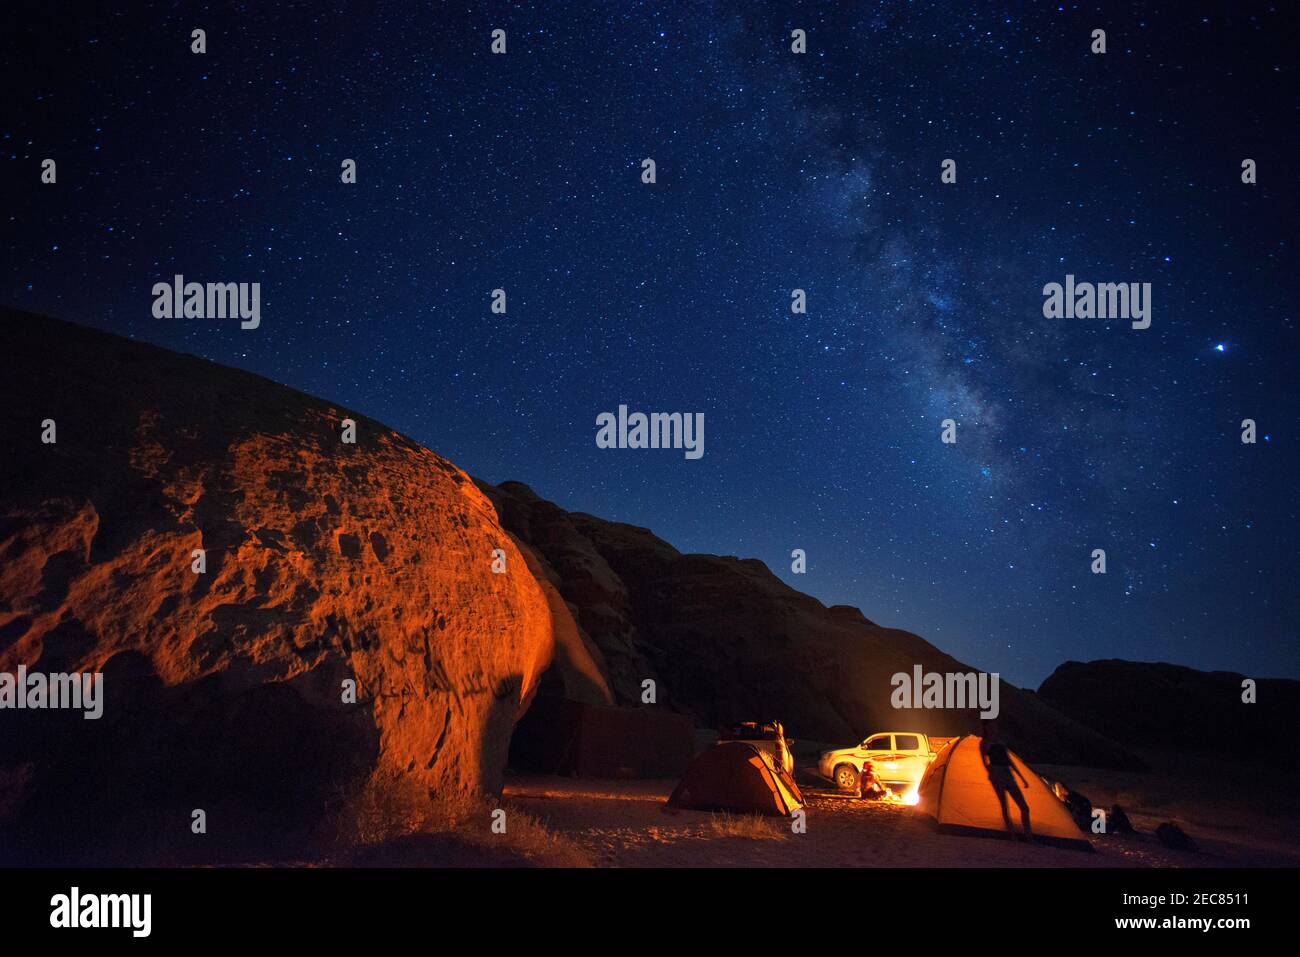 Northern Lights and traditional bedouin tents free campiing in the desert, Wadi Rum, Jordan. Stock Photo